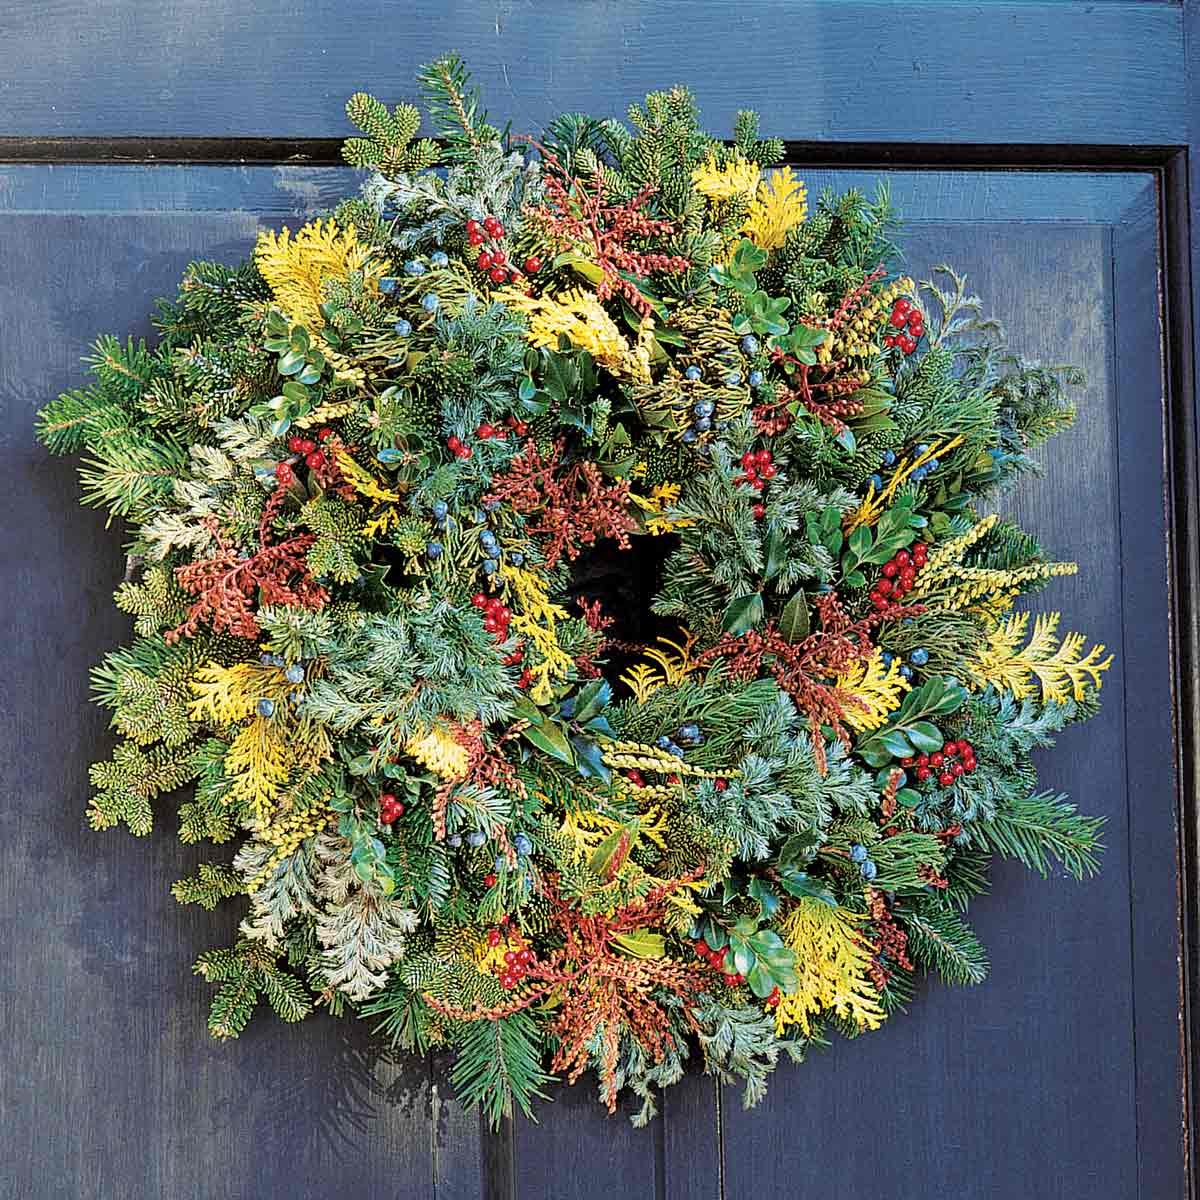 Clip-and-Snip Holiday Wreaths